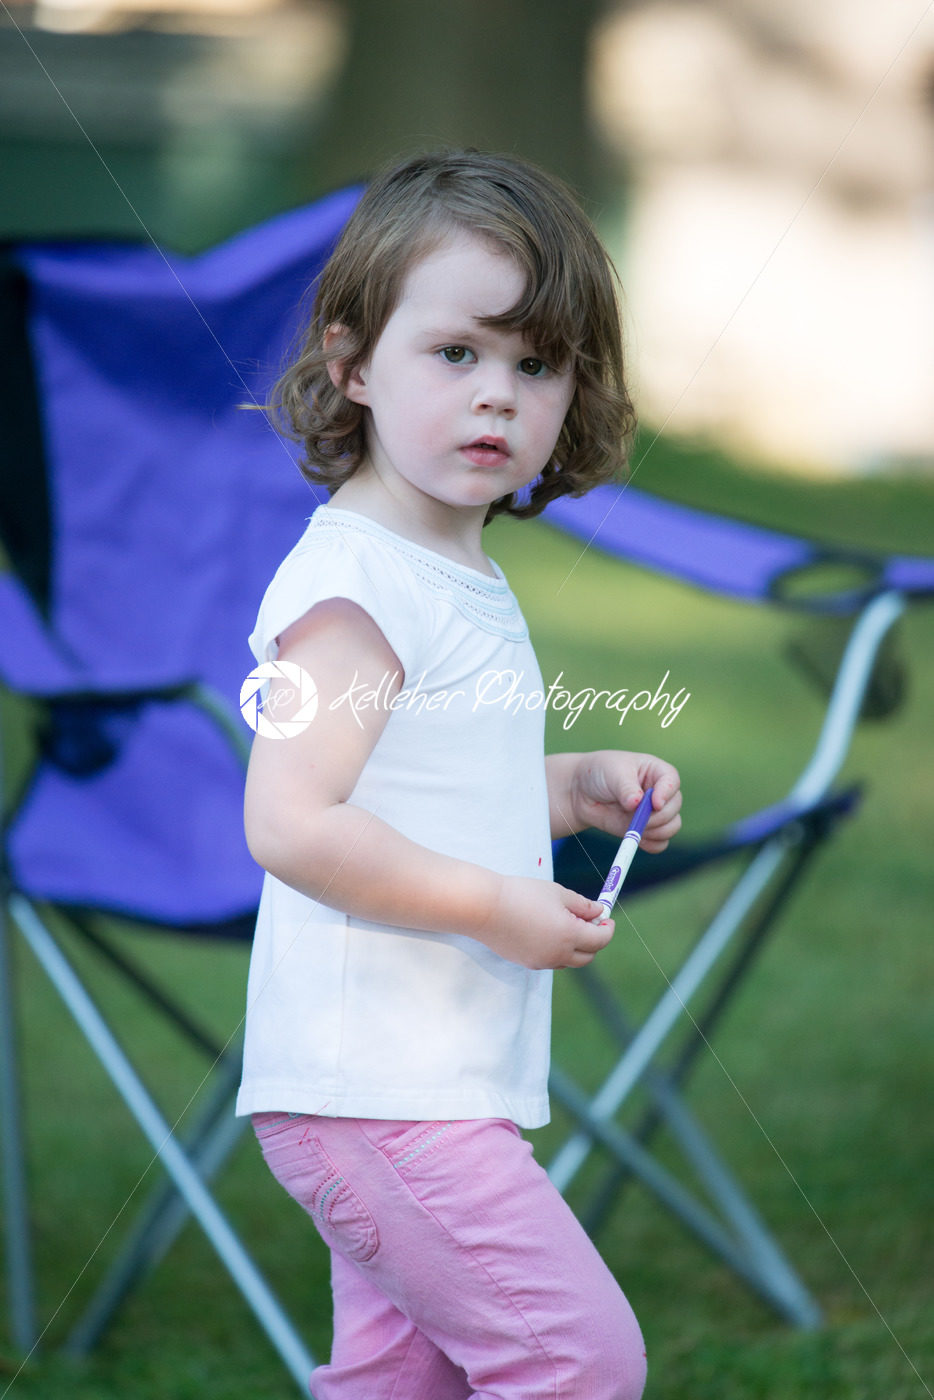 Young girl outside coloring with markers - Kelleher Photography Store